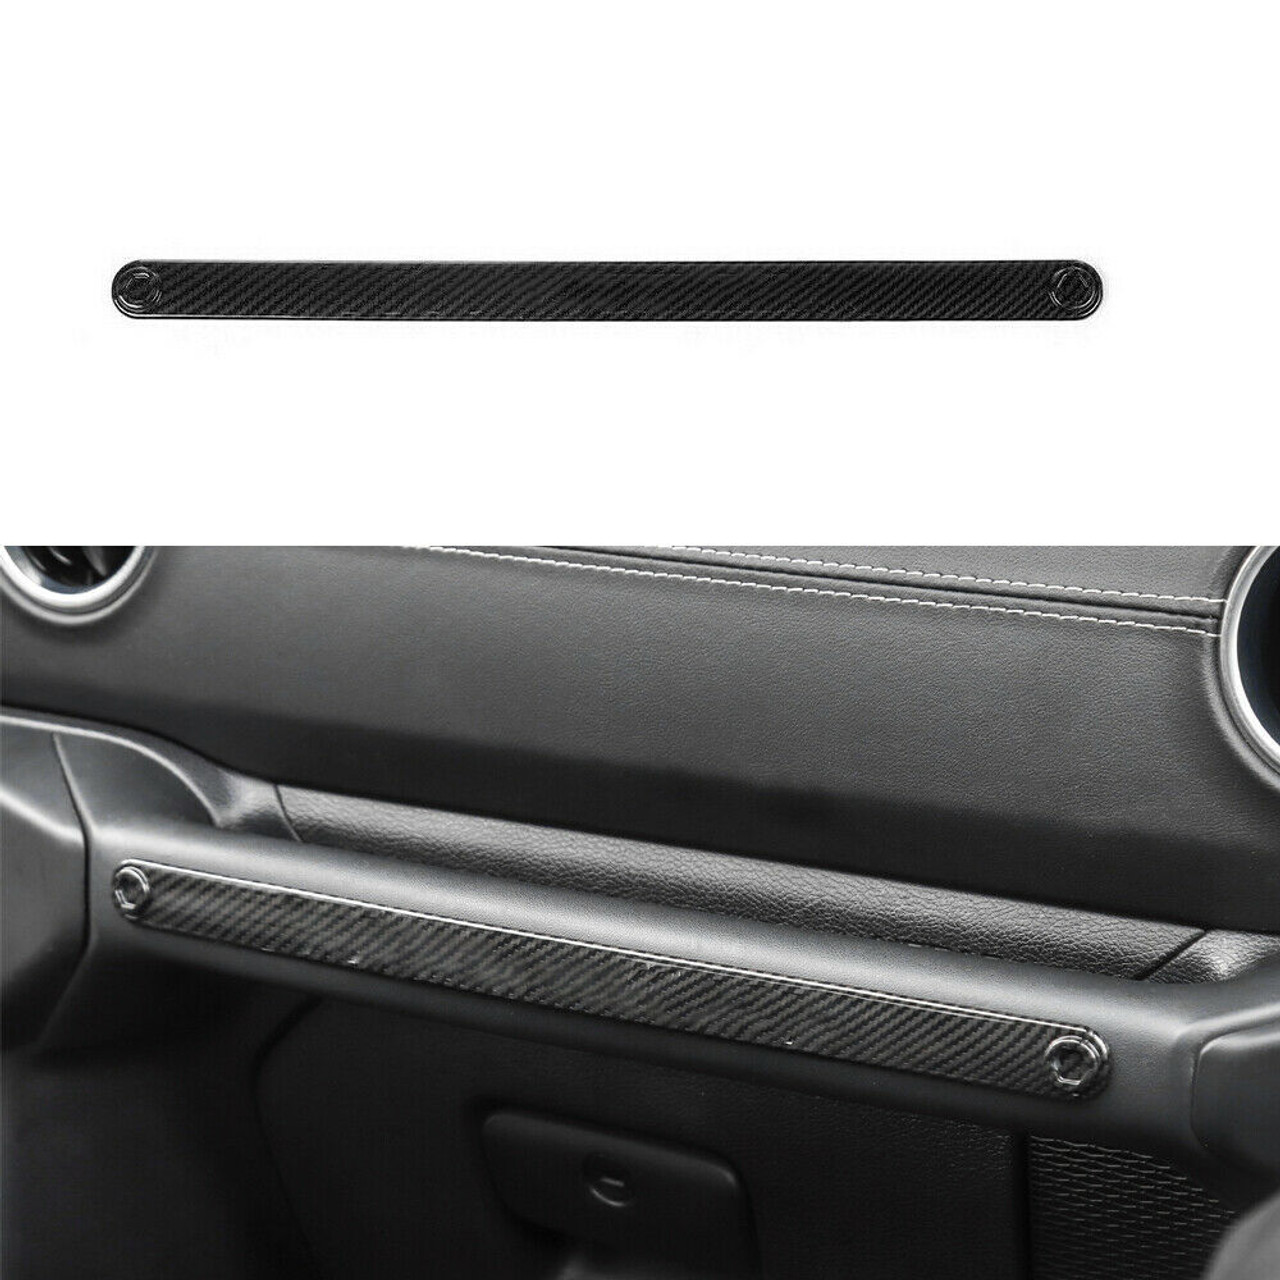 https://cdn11.bigcommerce.com/s-gyflrndtjl/images/stencil/1280x1280/products/525/5231/Co-Pilot_Side_Dashboard_Handle_Cover1__12620.1603323720.jpg?c=2